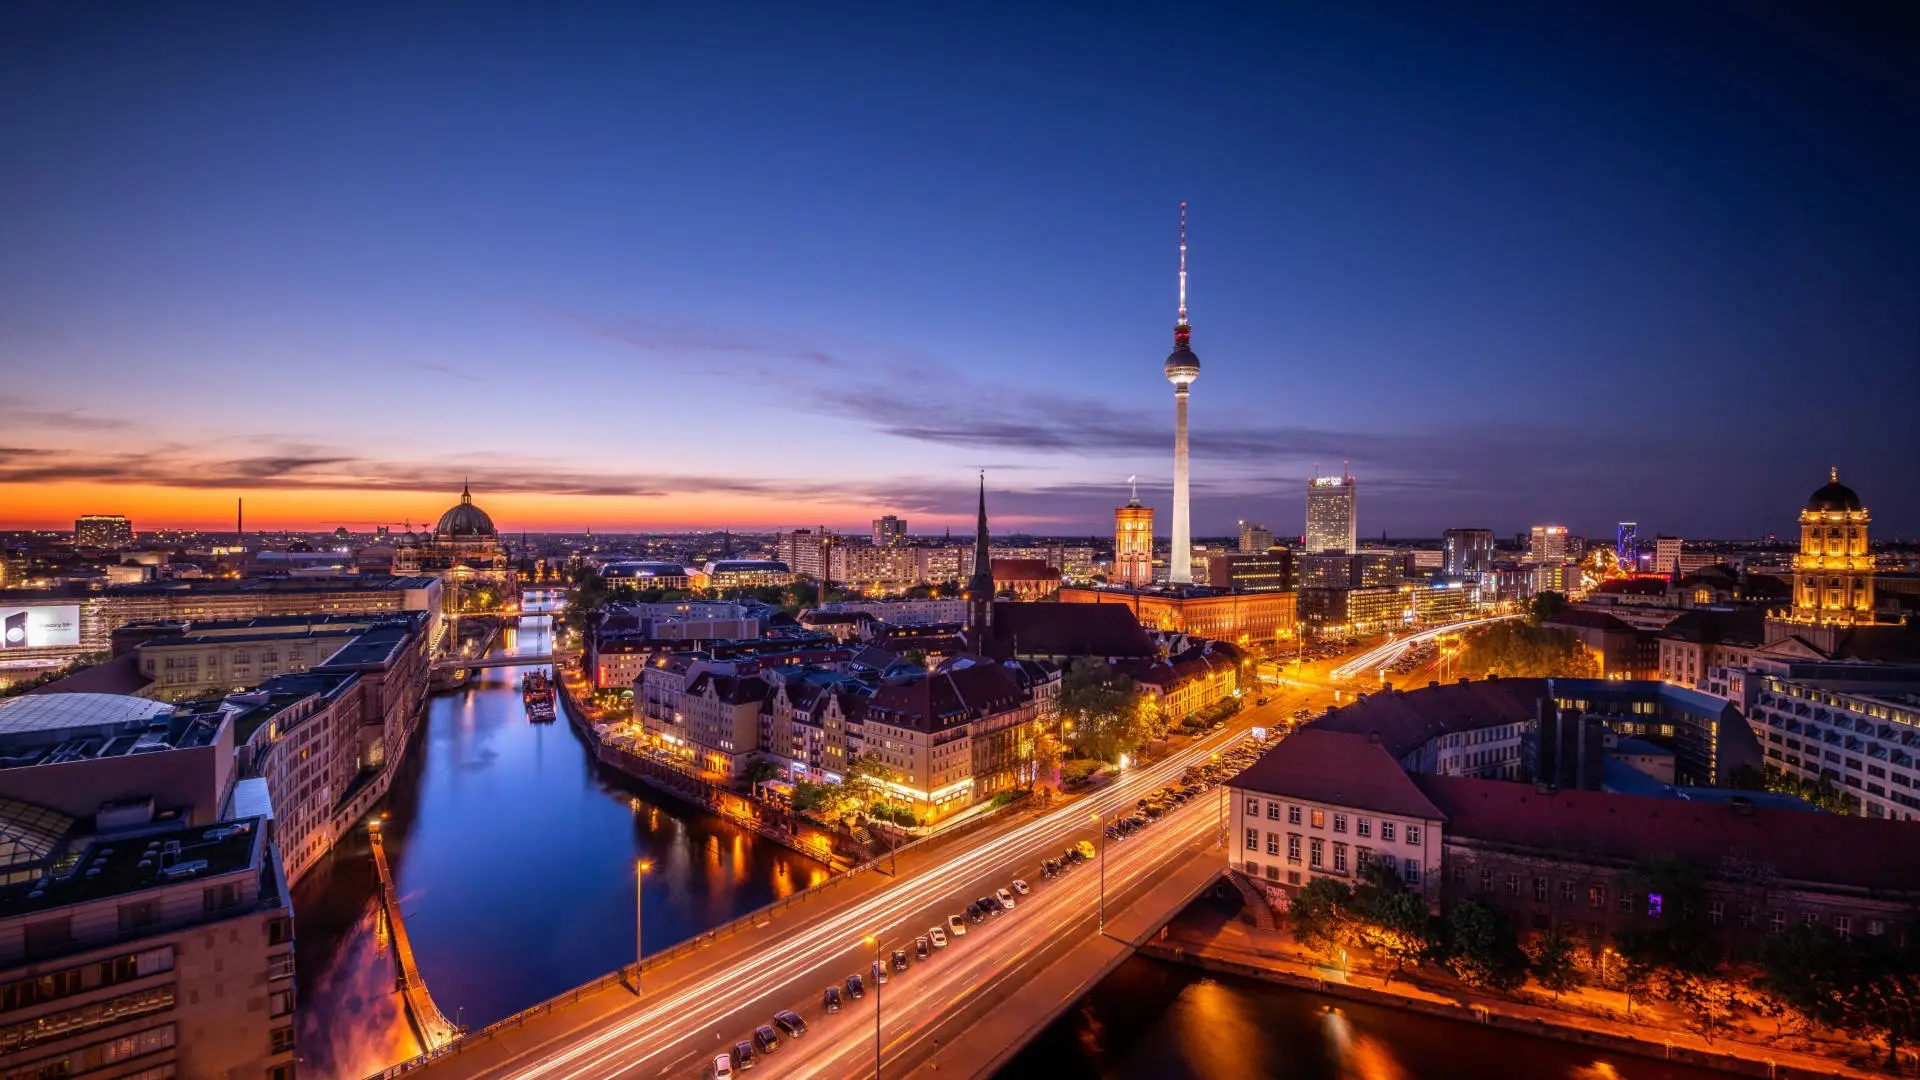 Luxury hotels in Berlin - ideal for a luxurious soccer experience